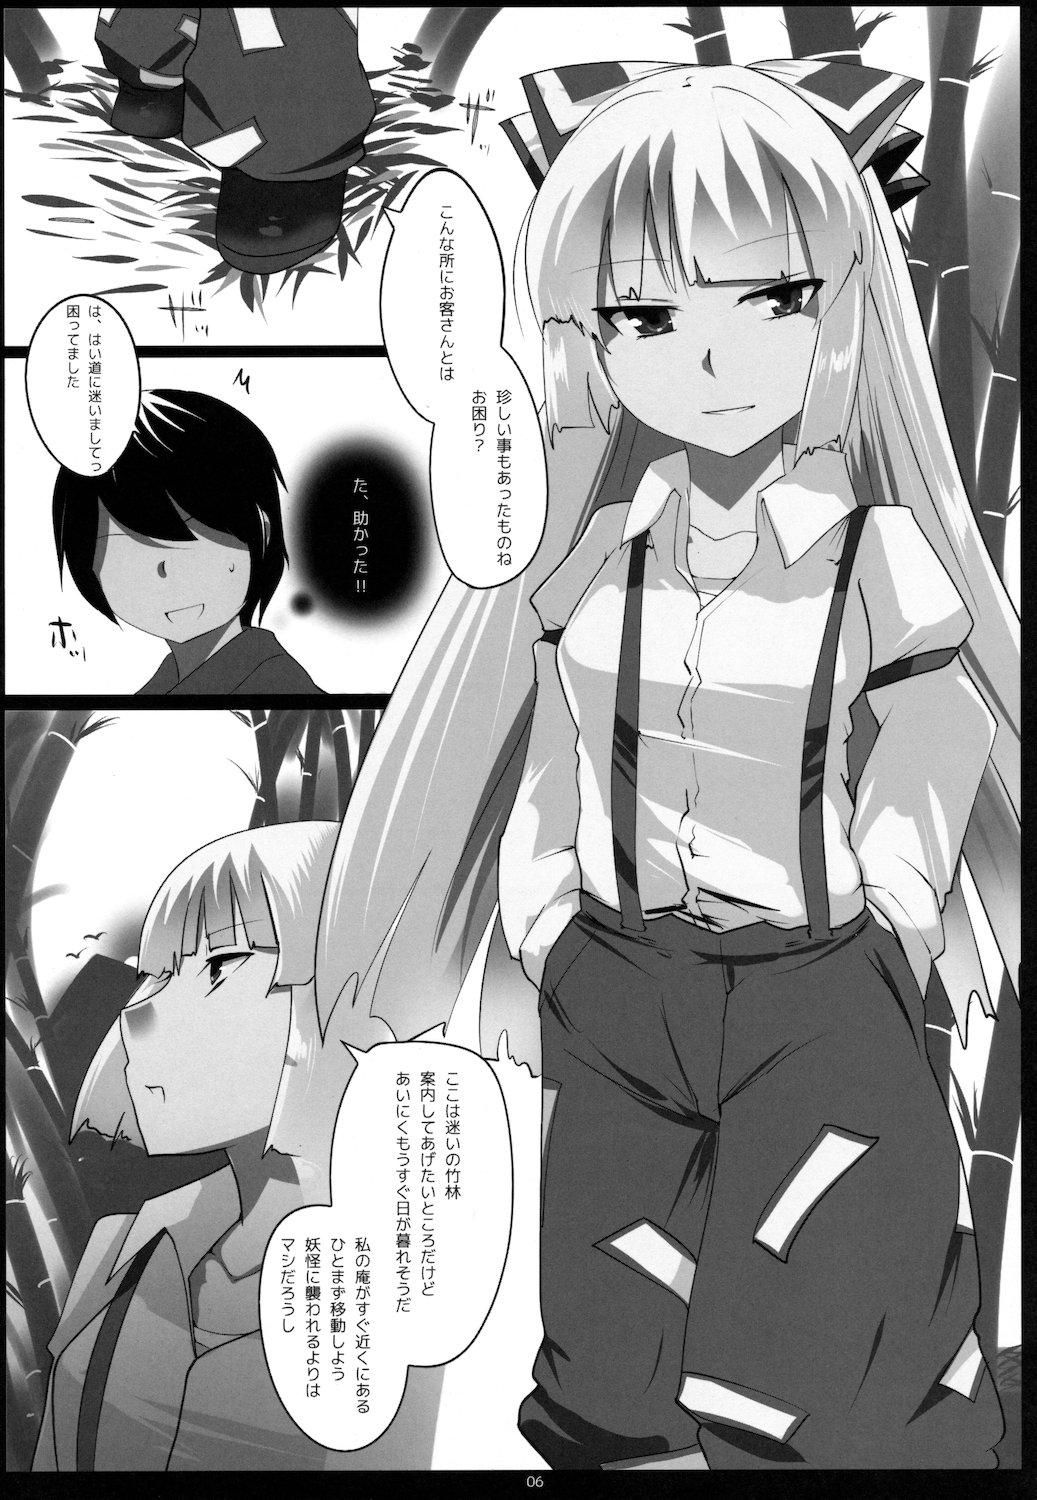 Tgirls Touhou Dere Bitch 7 - Touhou project Gay Rimming - Page 6